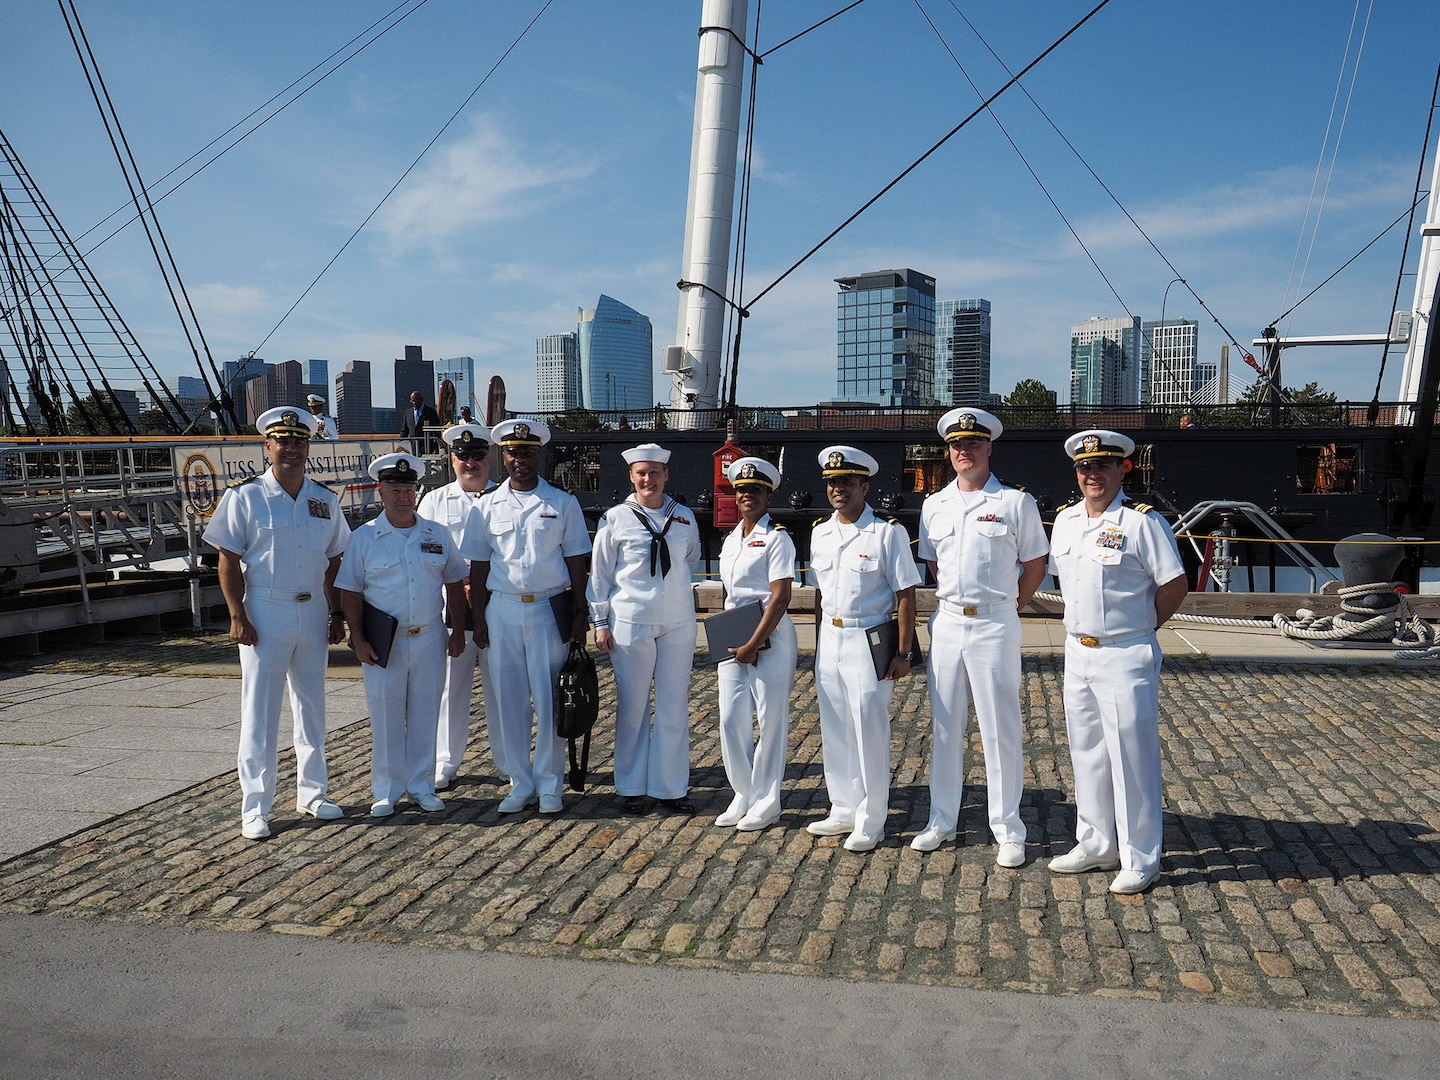 Nine sailors in white uniforms stand in front of a large sailing ship